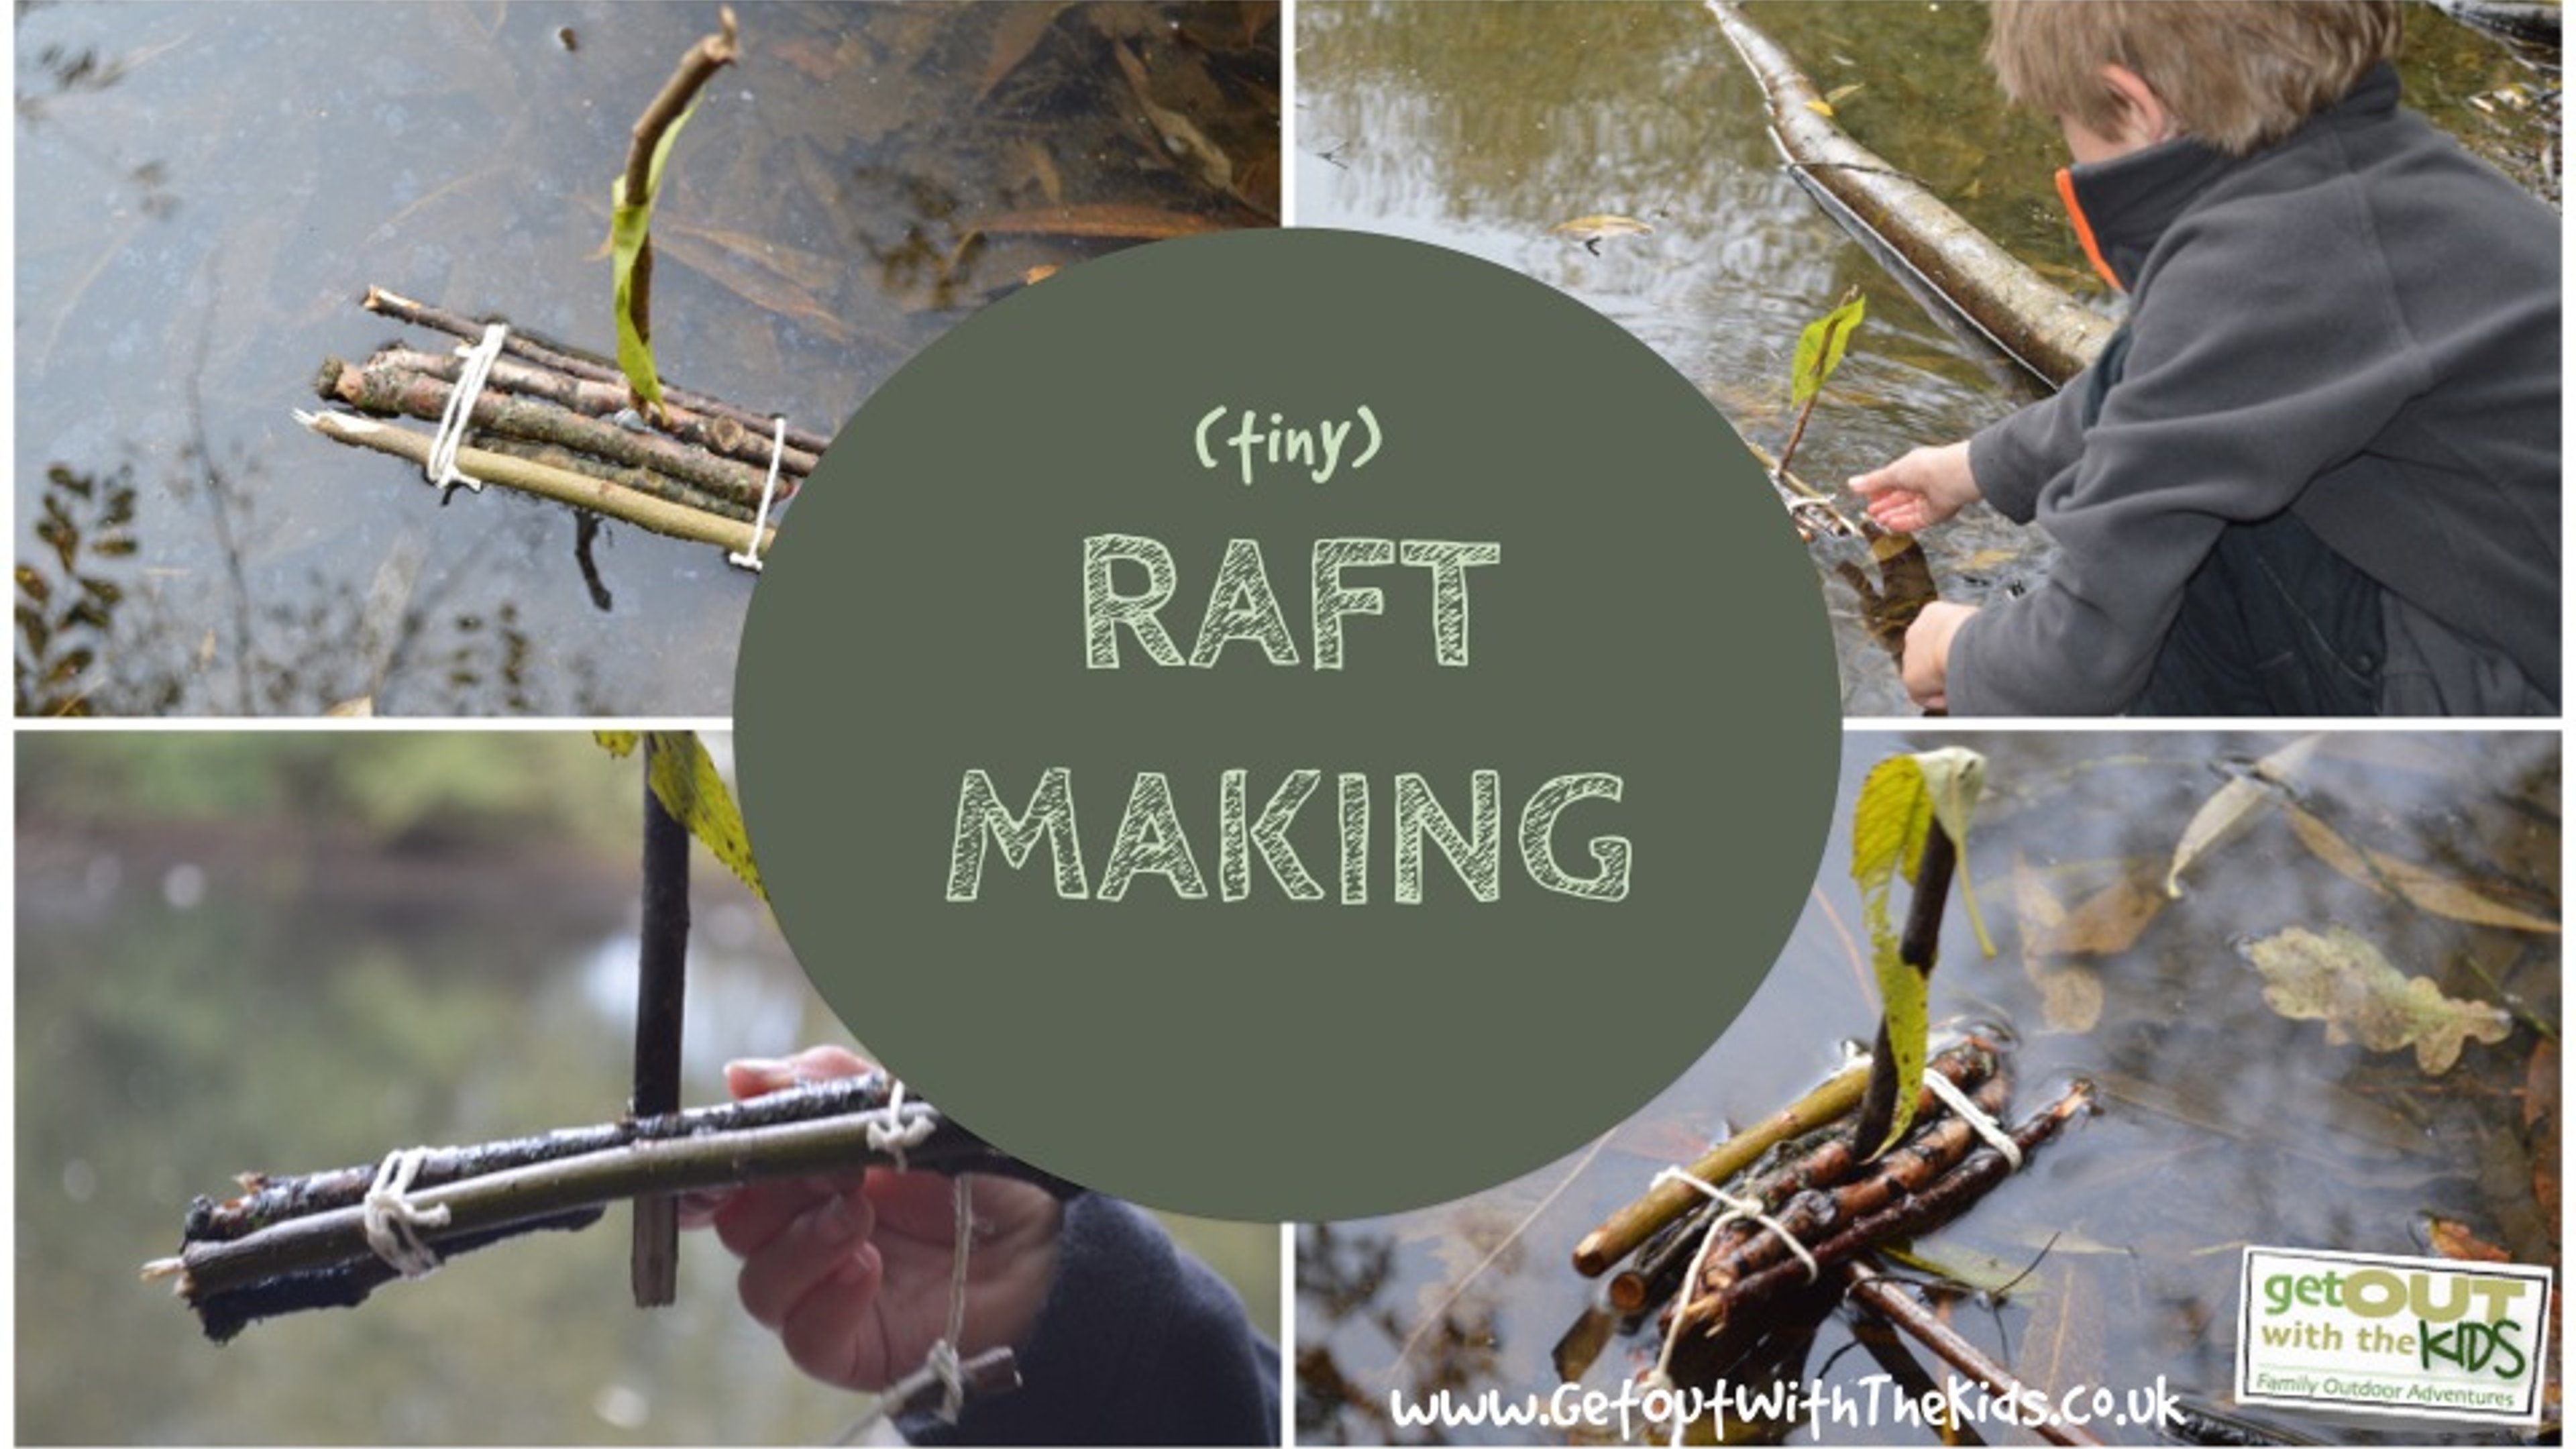 Bring some string to help make these tiny rafts